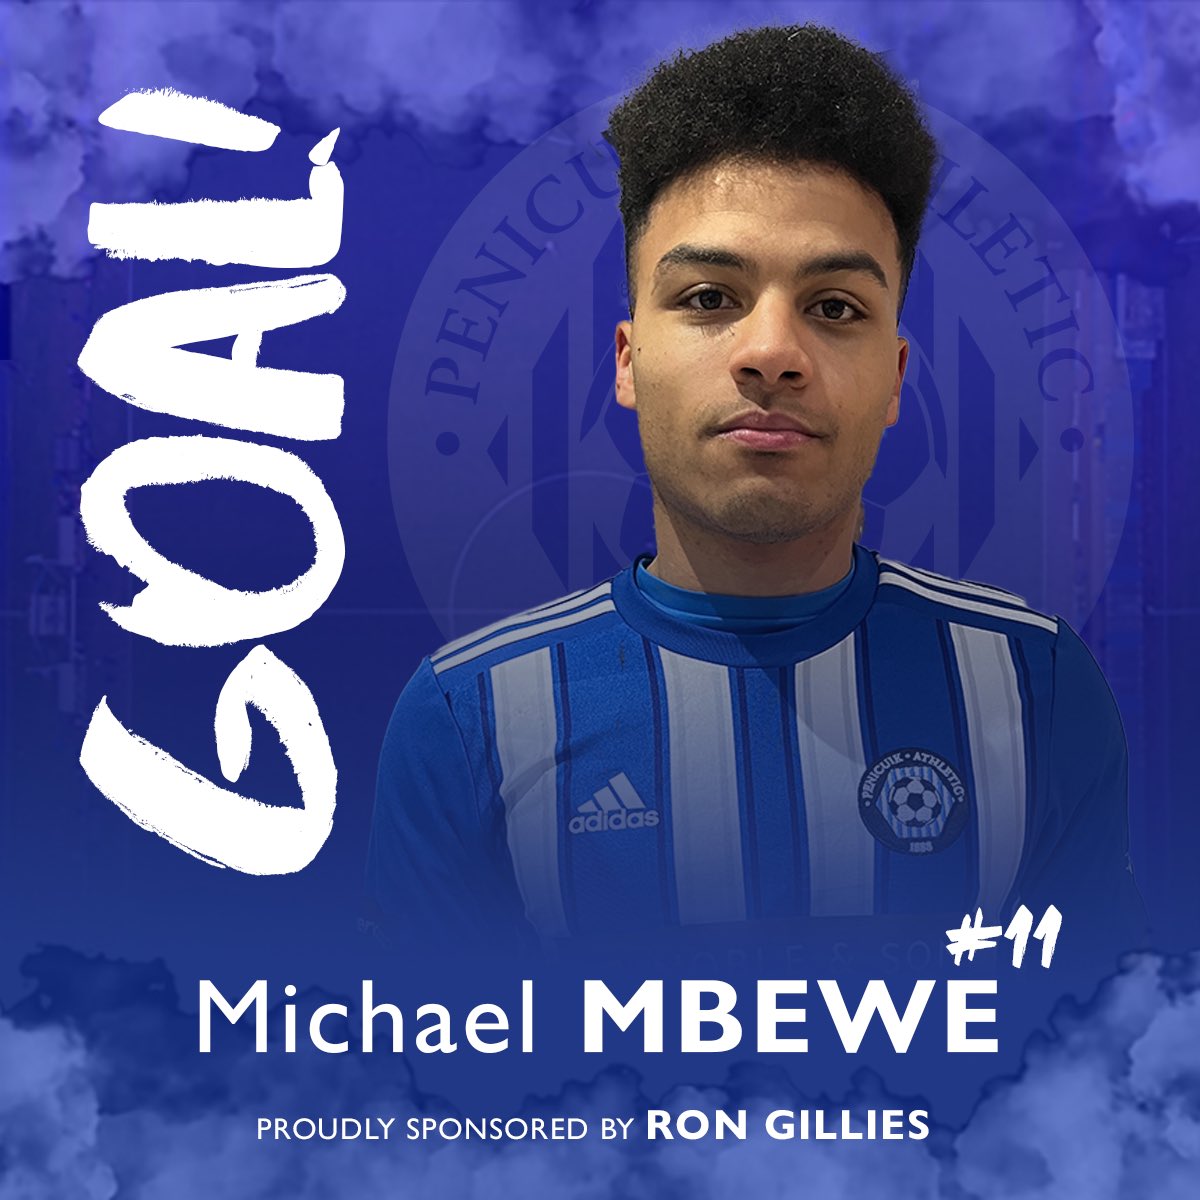 18’ | ⚽️ GOAL! Another lovely cross from O’Donnell is smashed into the back of the net by Michael MBEWE! Penicuik Athletic 🔵 2-0 🟡 Luncarty